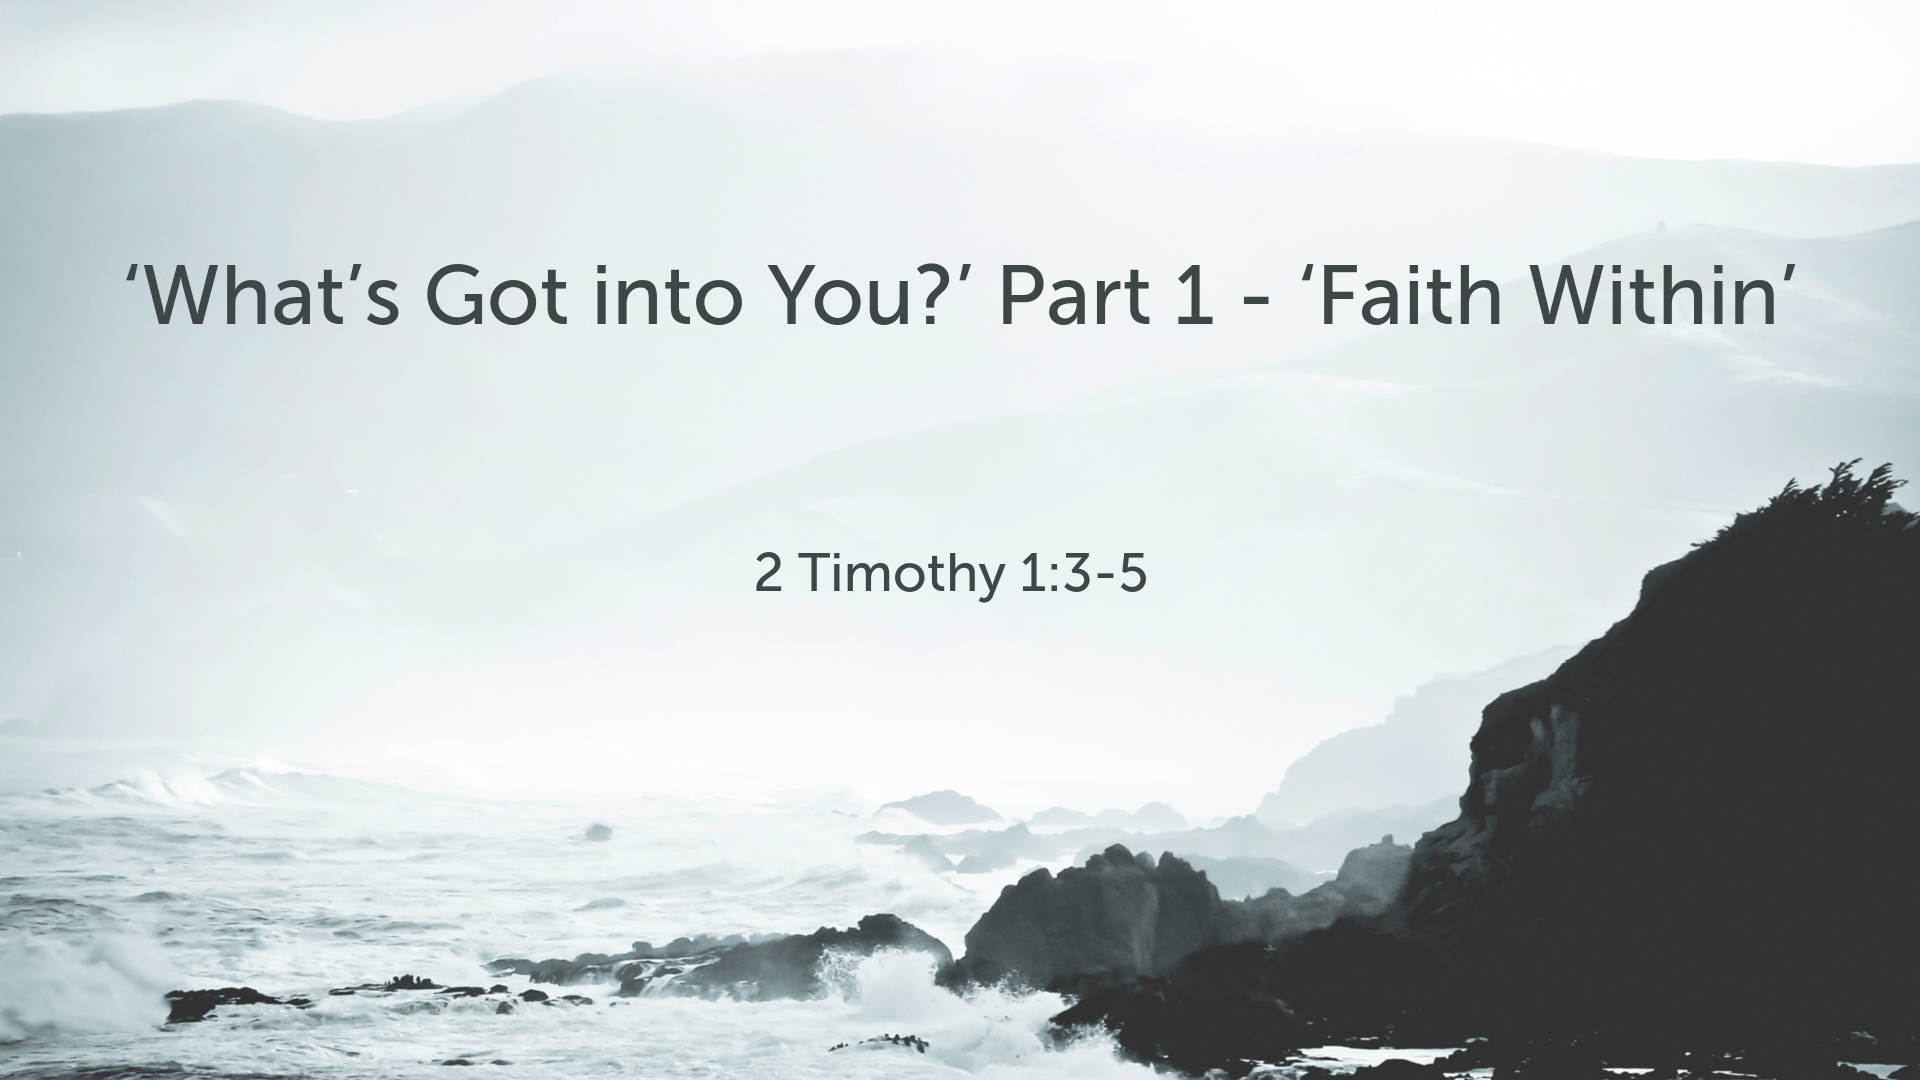 Nov 28, 2021 - What's Got into You? Part 1 - Faith Within   (Video) - 2 Timothy 1: 3-5